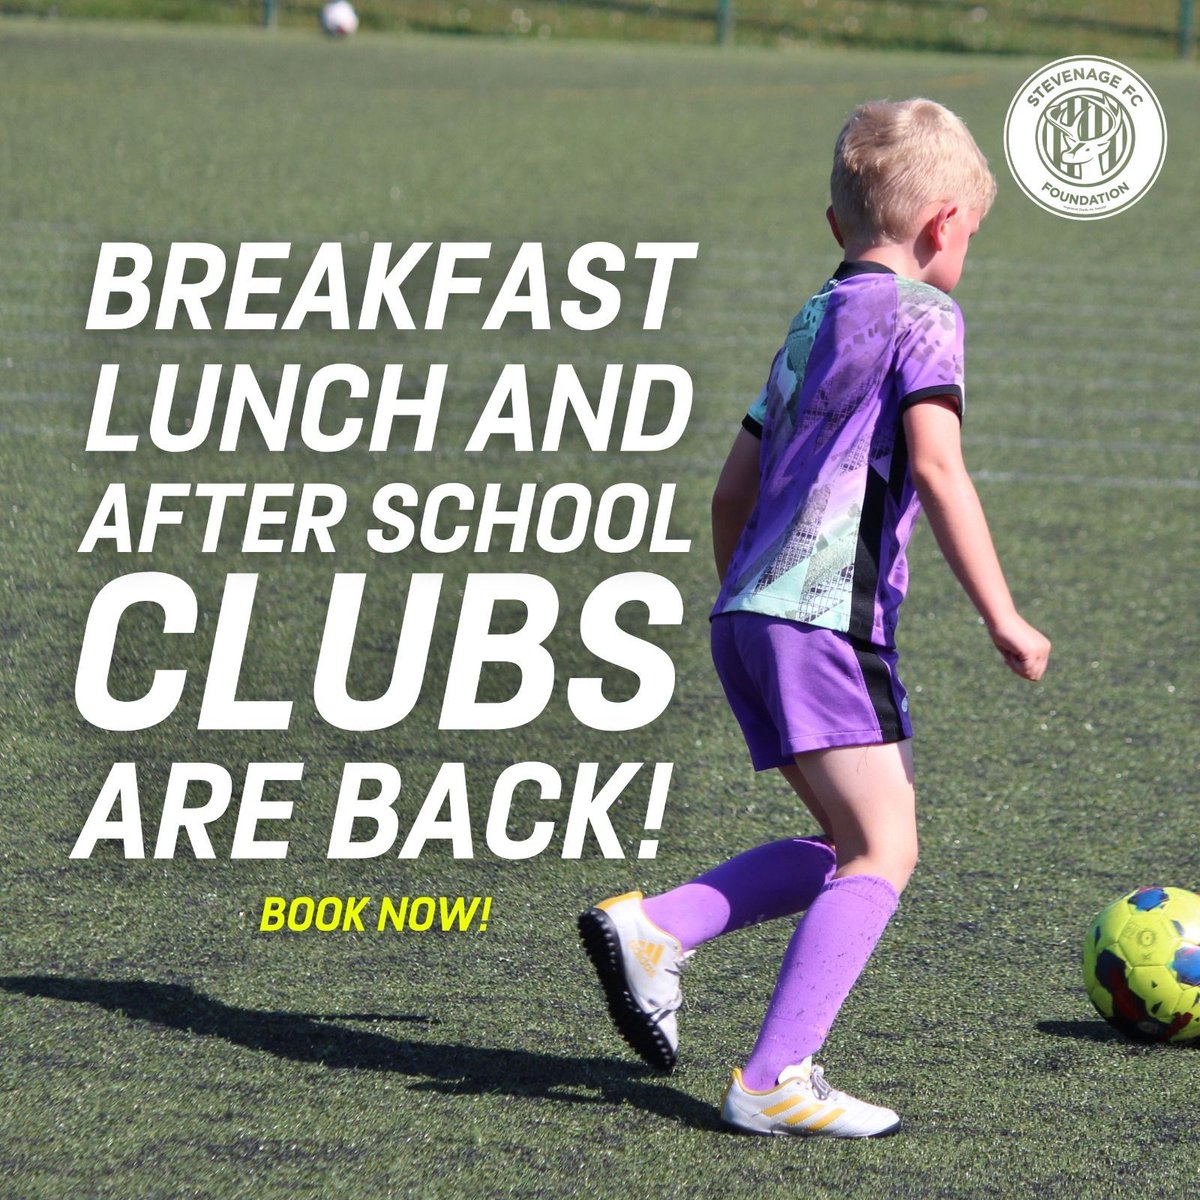 Our school sessions are back! 🕺 Book now to secure your place for the summer term!🥳 🔗- buff.ly/3HCjAPu #extracurricular #school #stevenagefc #stevenagefcf #stevenagefcfoundation